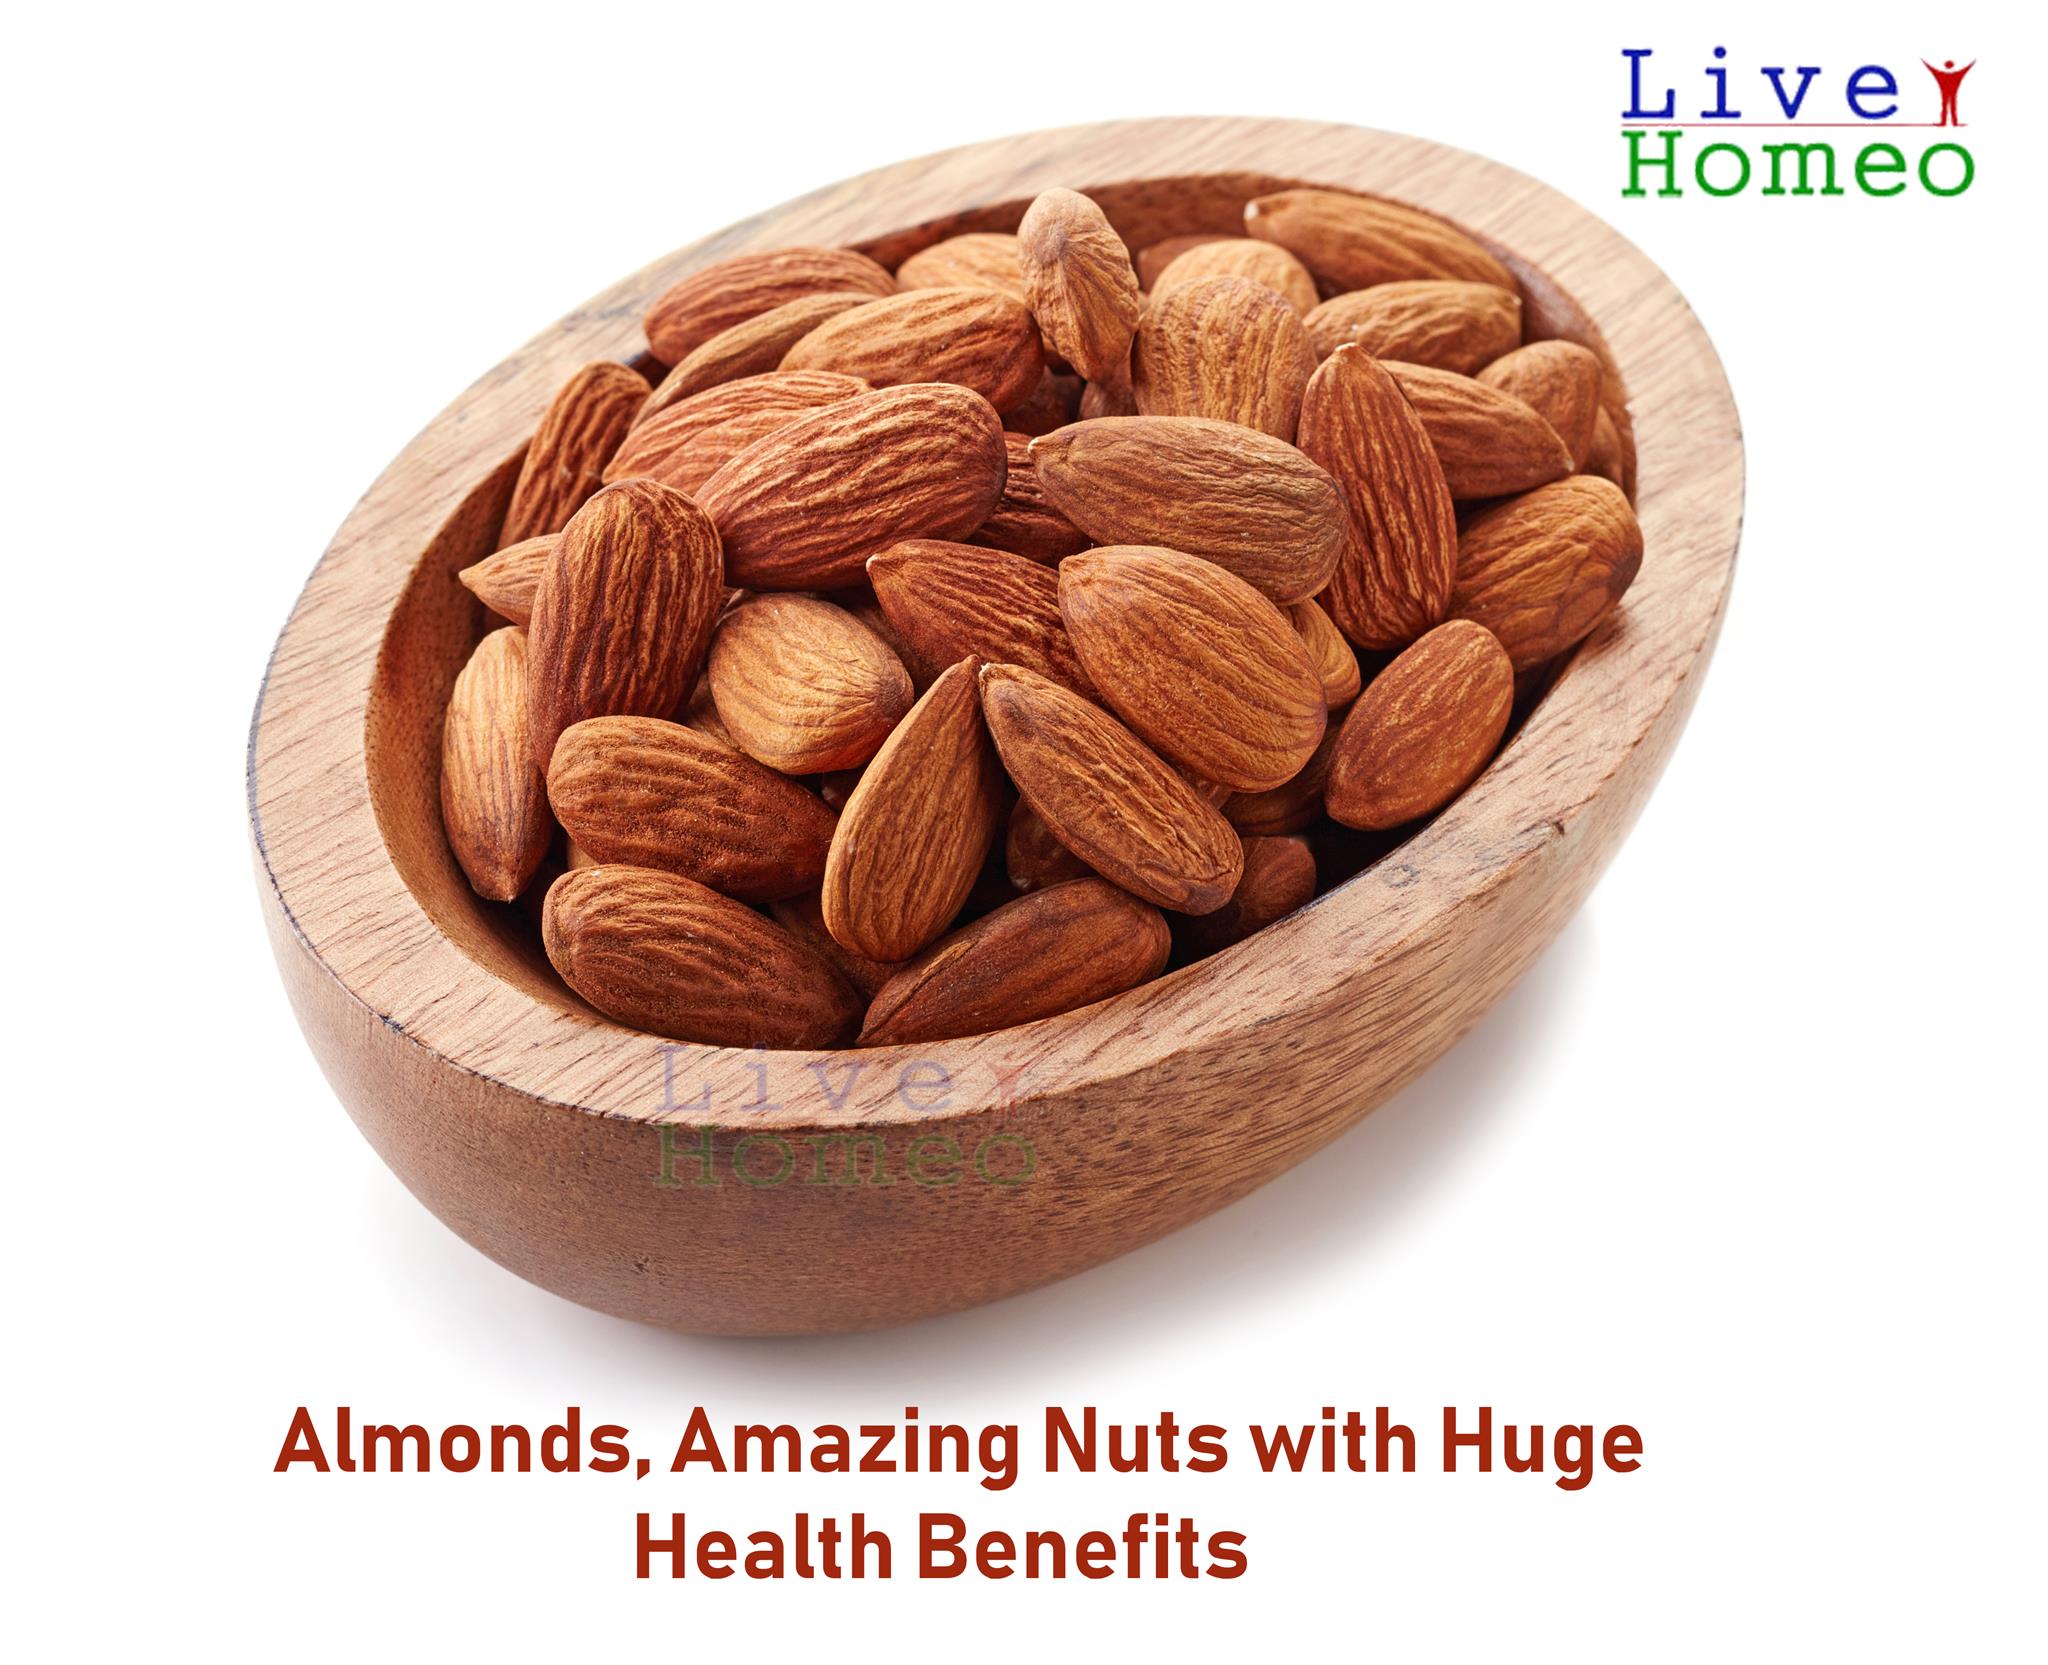 Almonds, Amazing Nuts with Huge Health Benefits